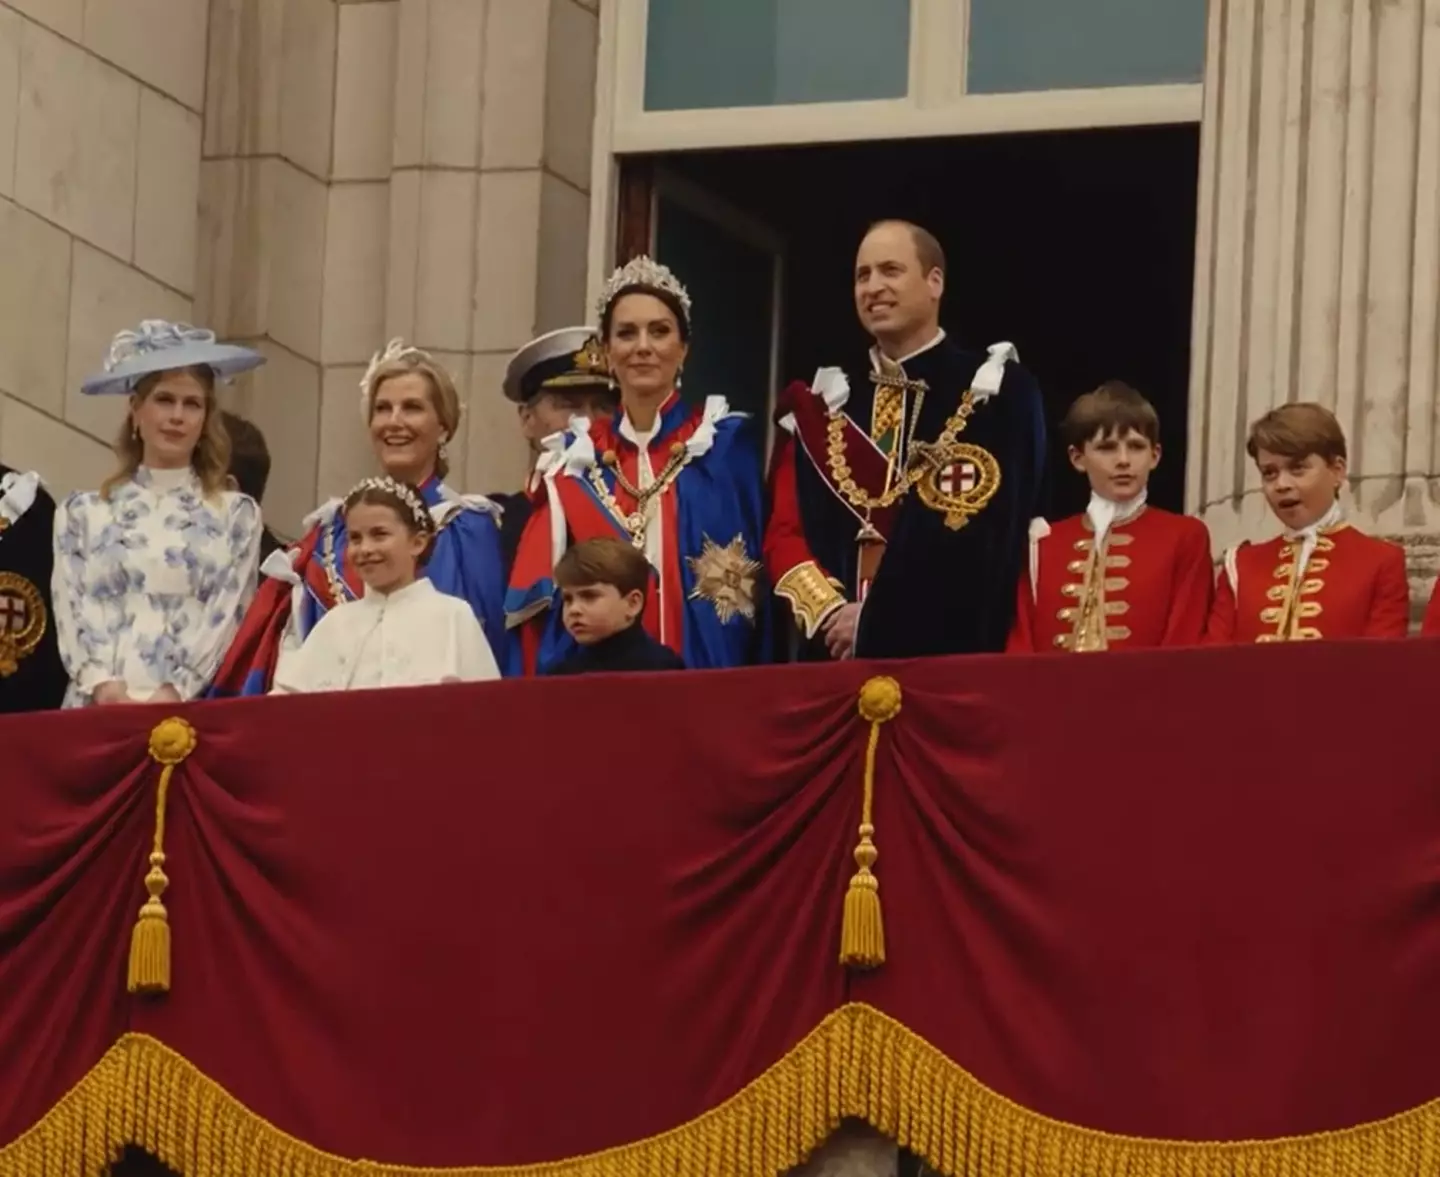 Will and Kate appeared with their kids on the balcony of Buckingham Palace after the ceremony.